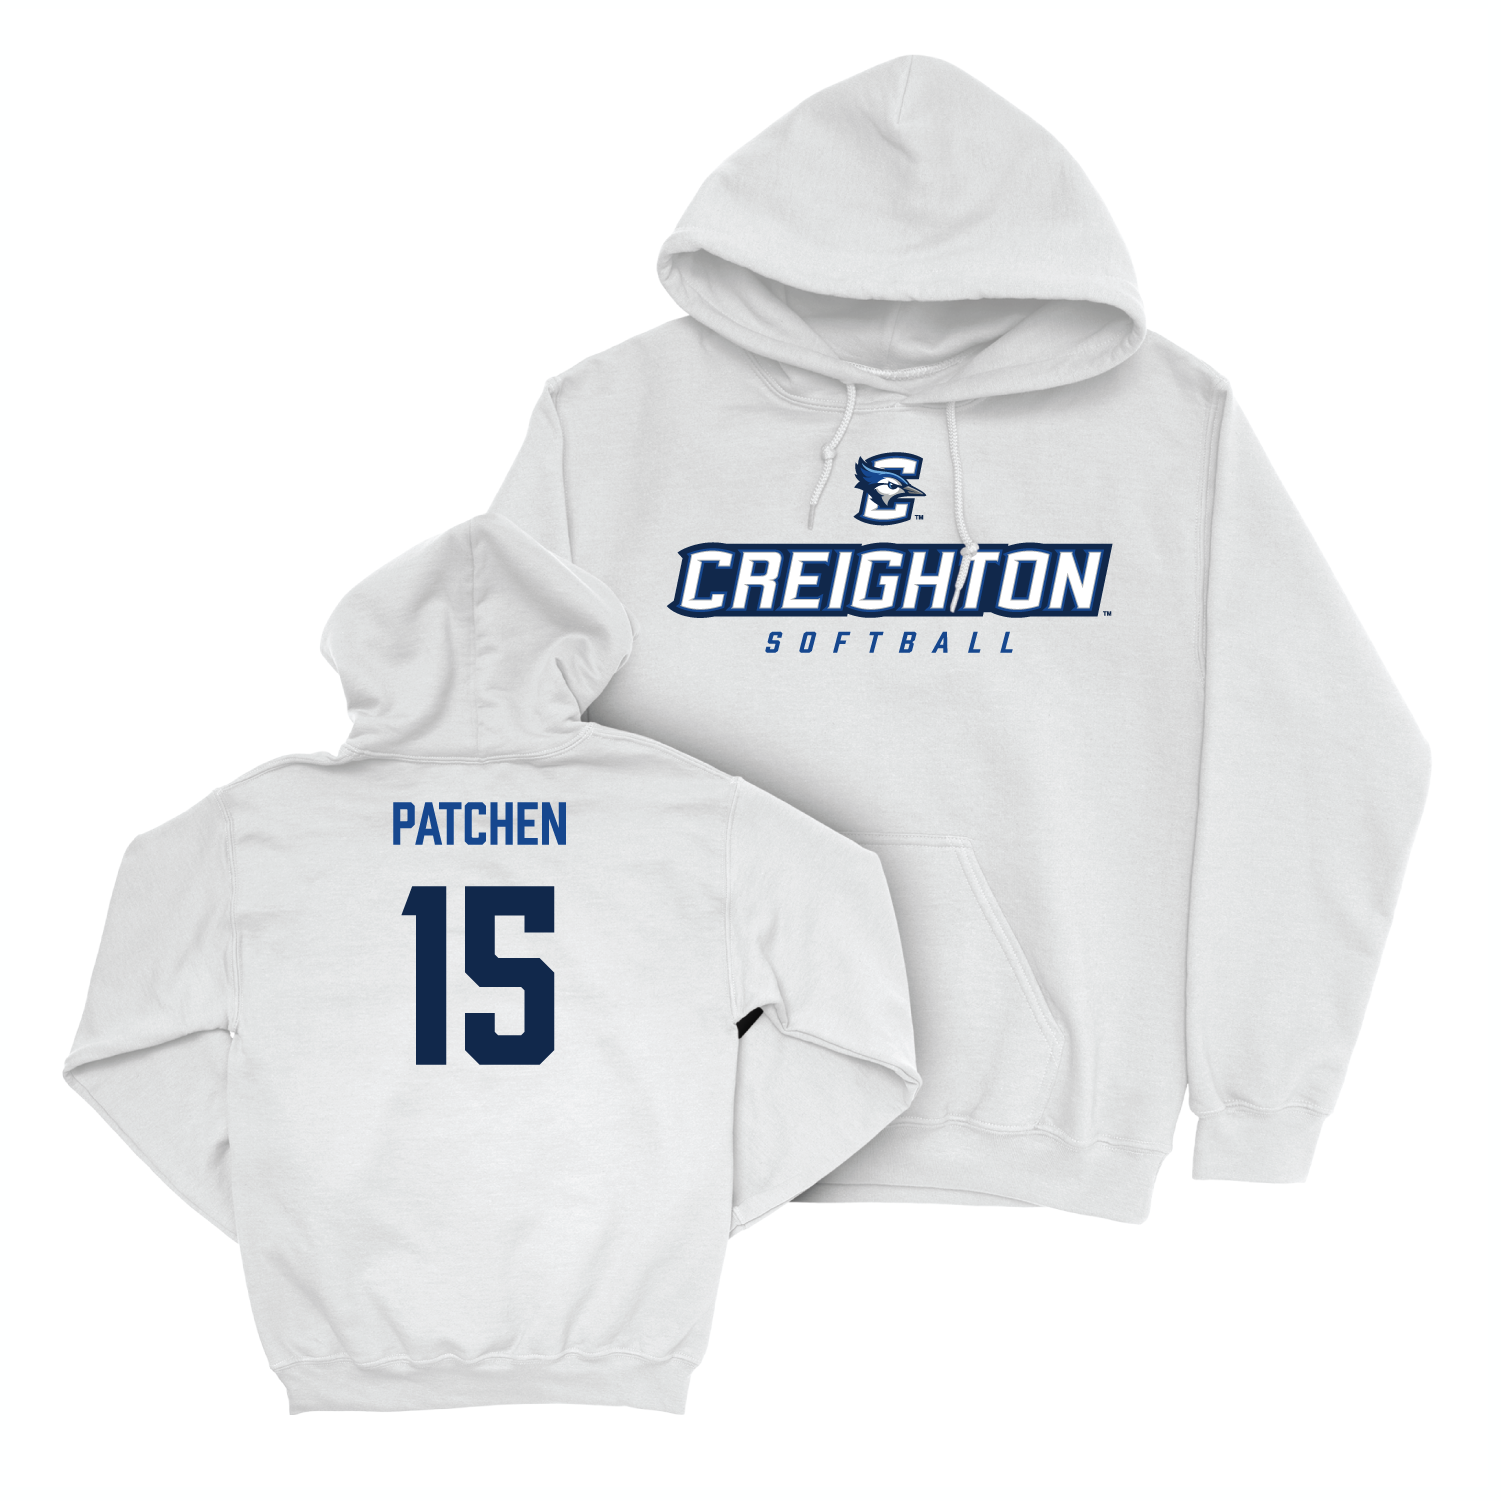 Creighton Softball White Athletic Hoodie - Brooklyn Patchen Youth Small